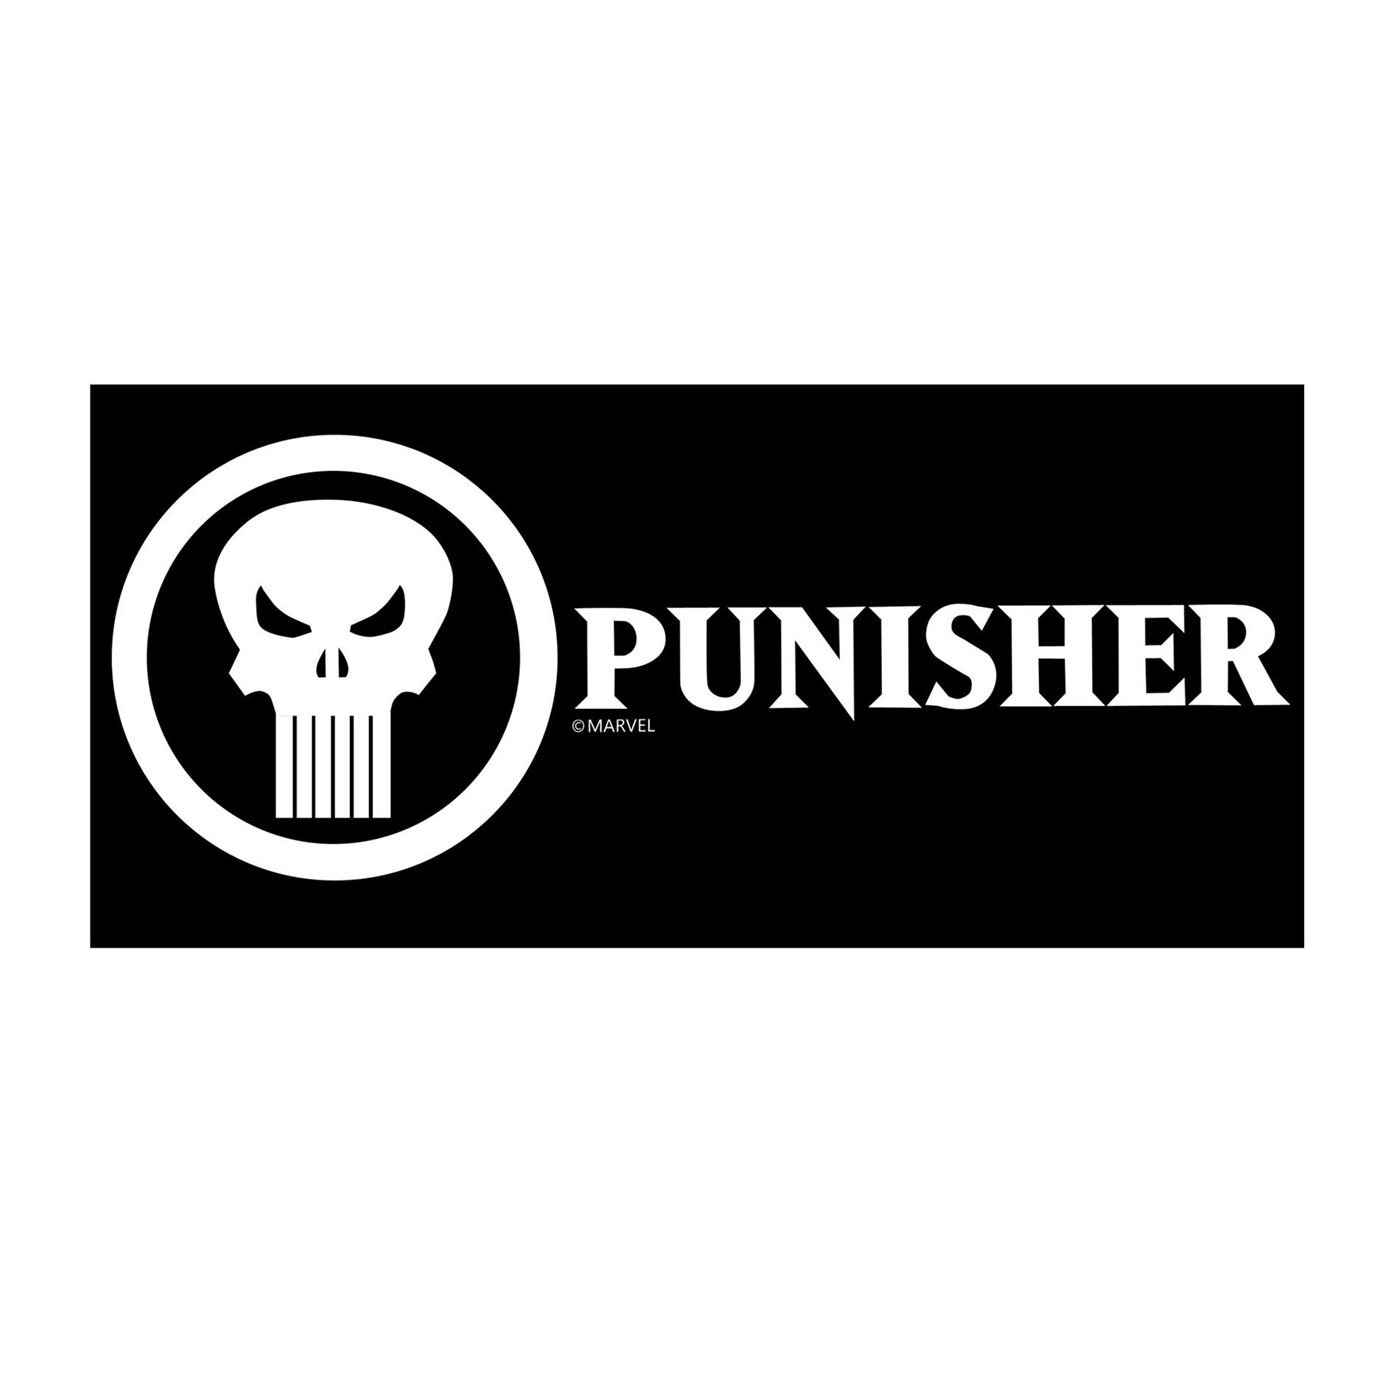 Punisher Text & Symbol White Decal